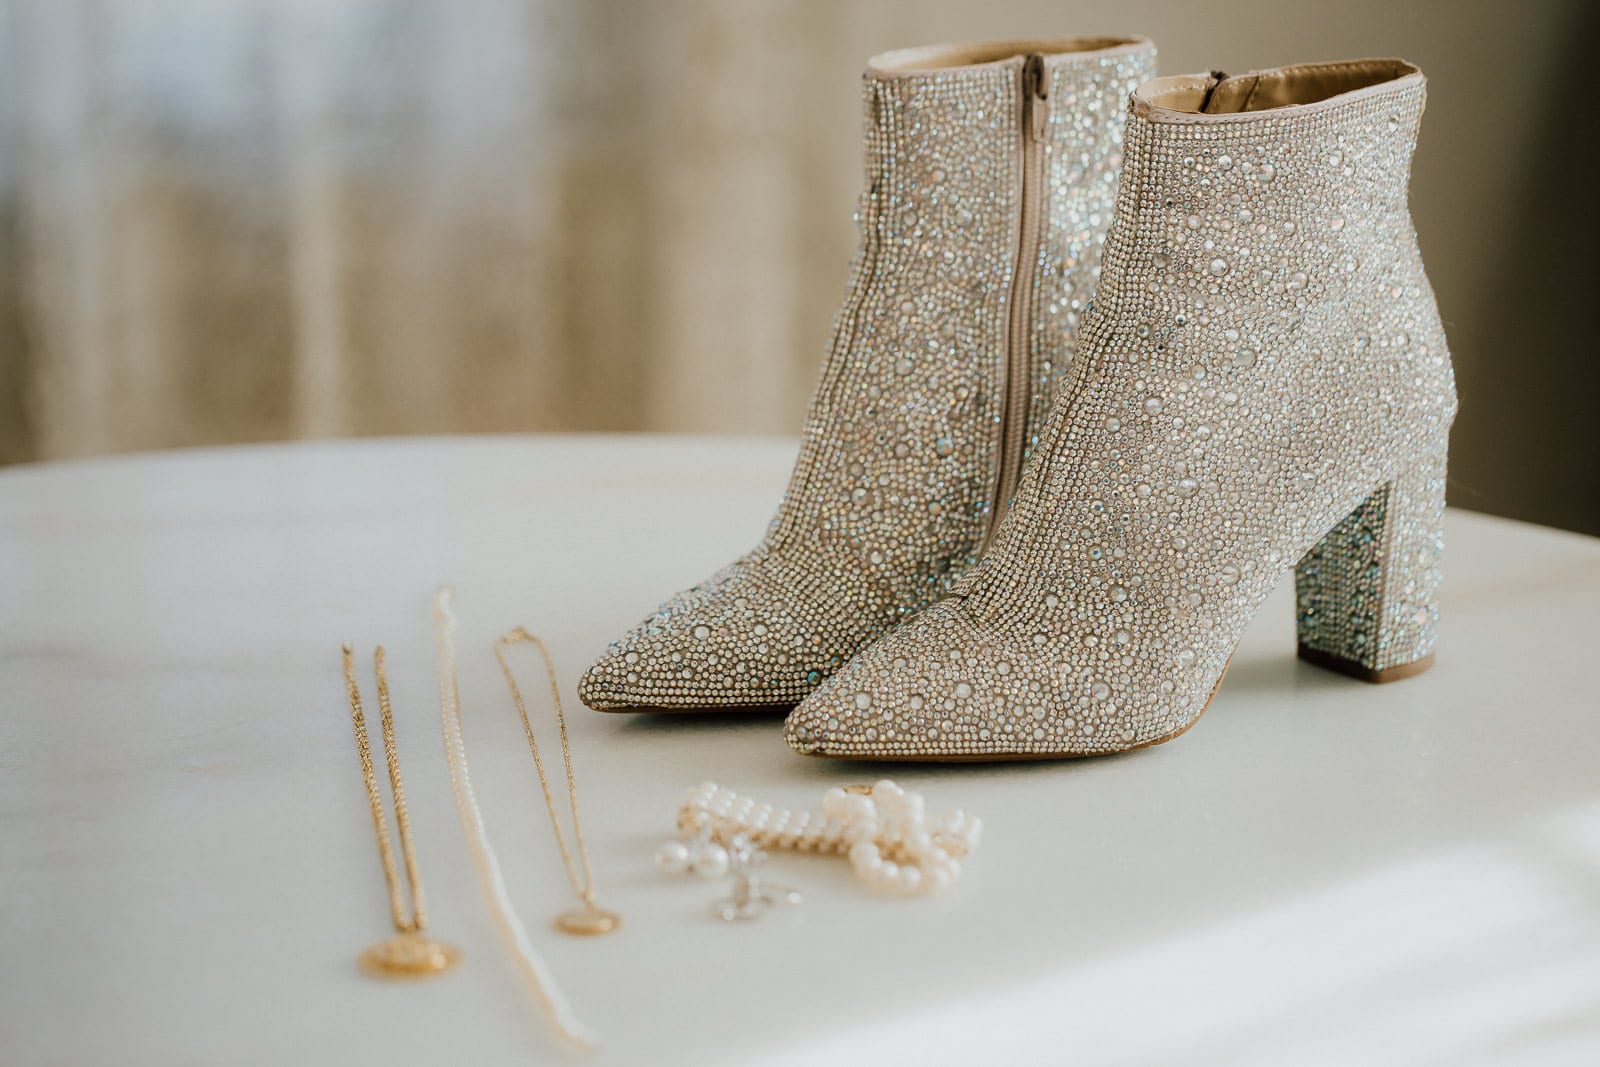 details of wedding jewelry, pearls, and shoes